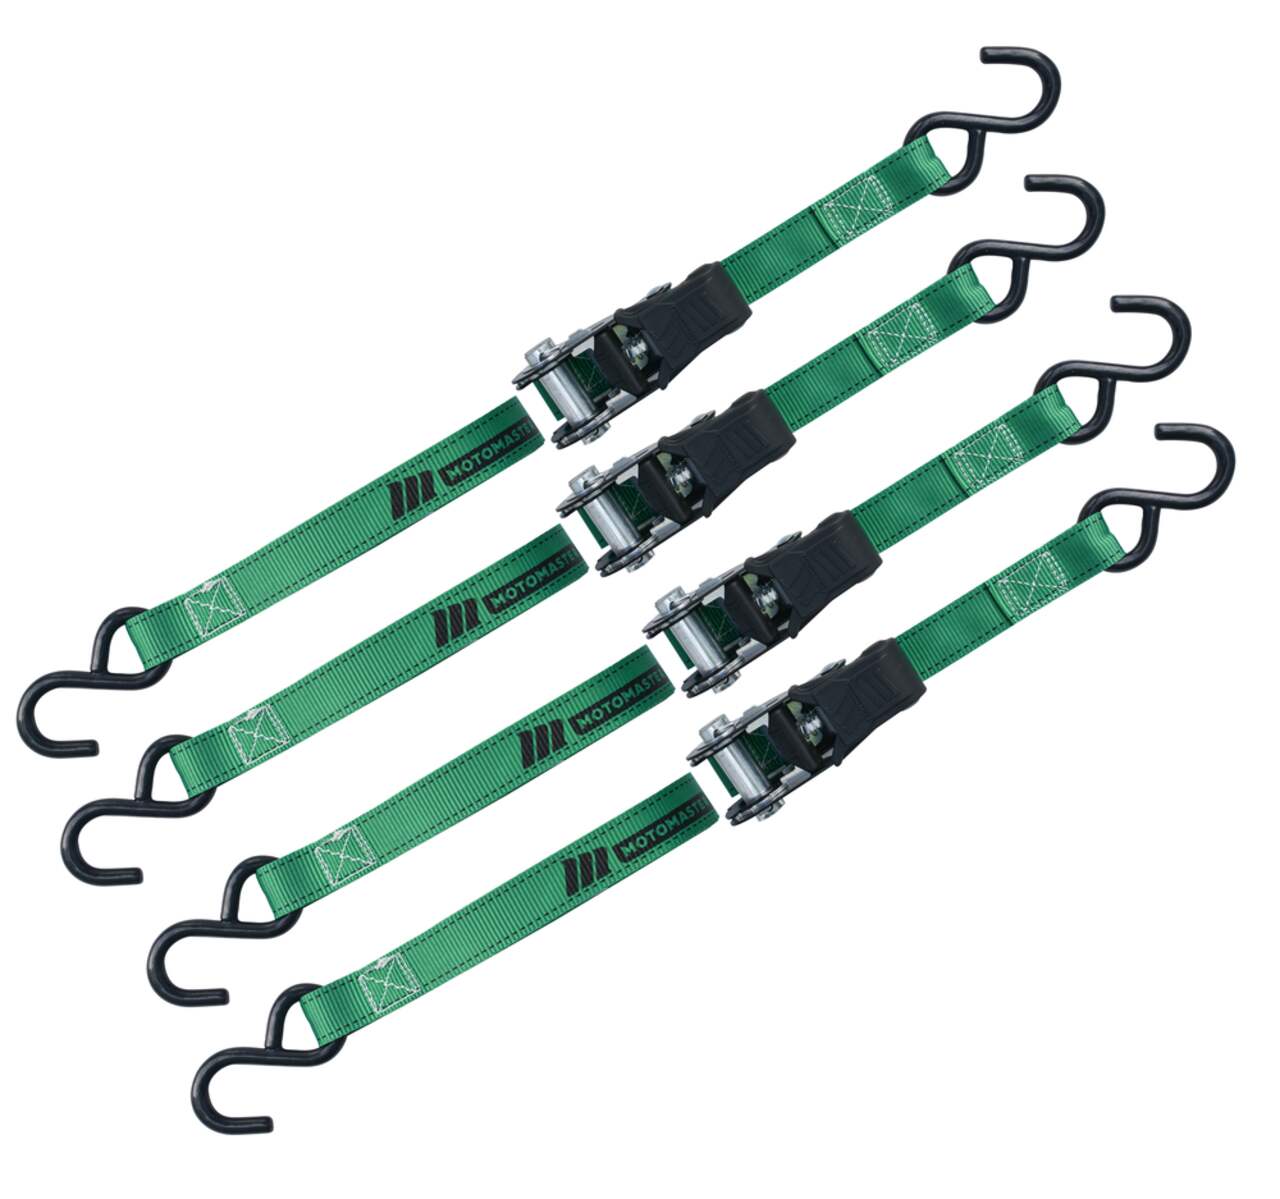 https://media-www.canadiantire.ca/product/automotive/automotive-outdoor-adventure/tarps-cords/0402906/14ft-1-500lb-padded-ratchet-tie-downs-4pk-9aeef571-dd26-4142-993a-30a5e1a74212.png?imdensity=1&imwidth=640&impolicy=mZoom